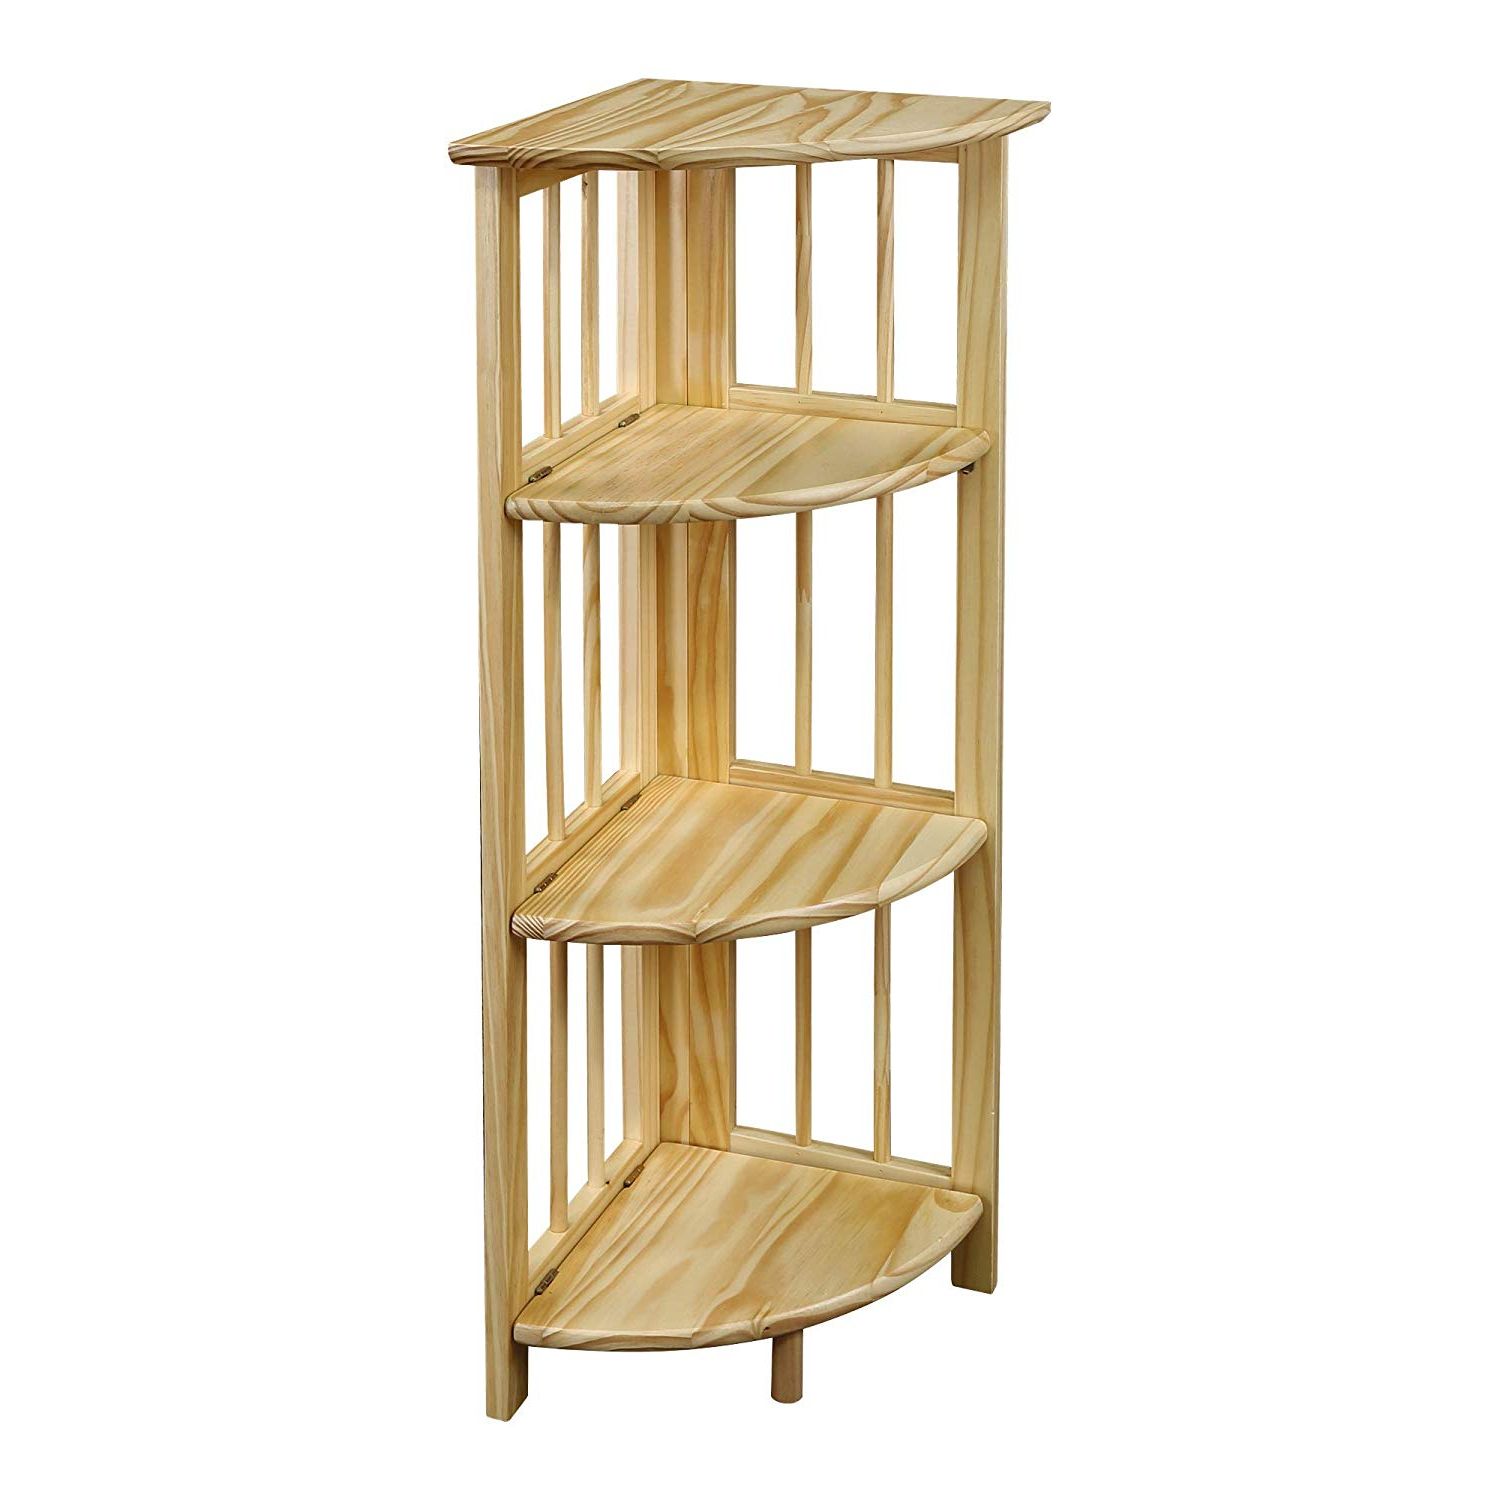 2019 Yu Shan 4 Shelf Corner Bookcase, Natural Within Johannes Corner Bookcases (View 15 of 20)